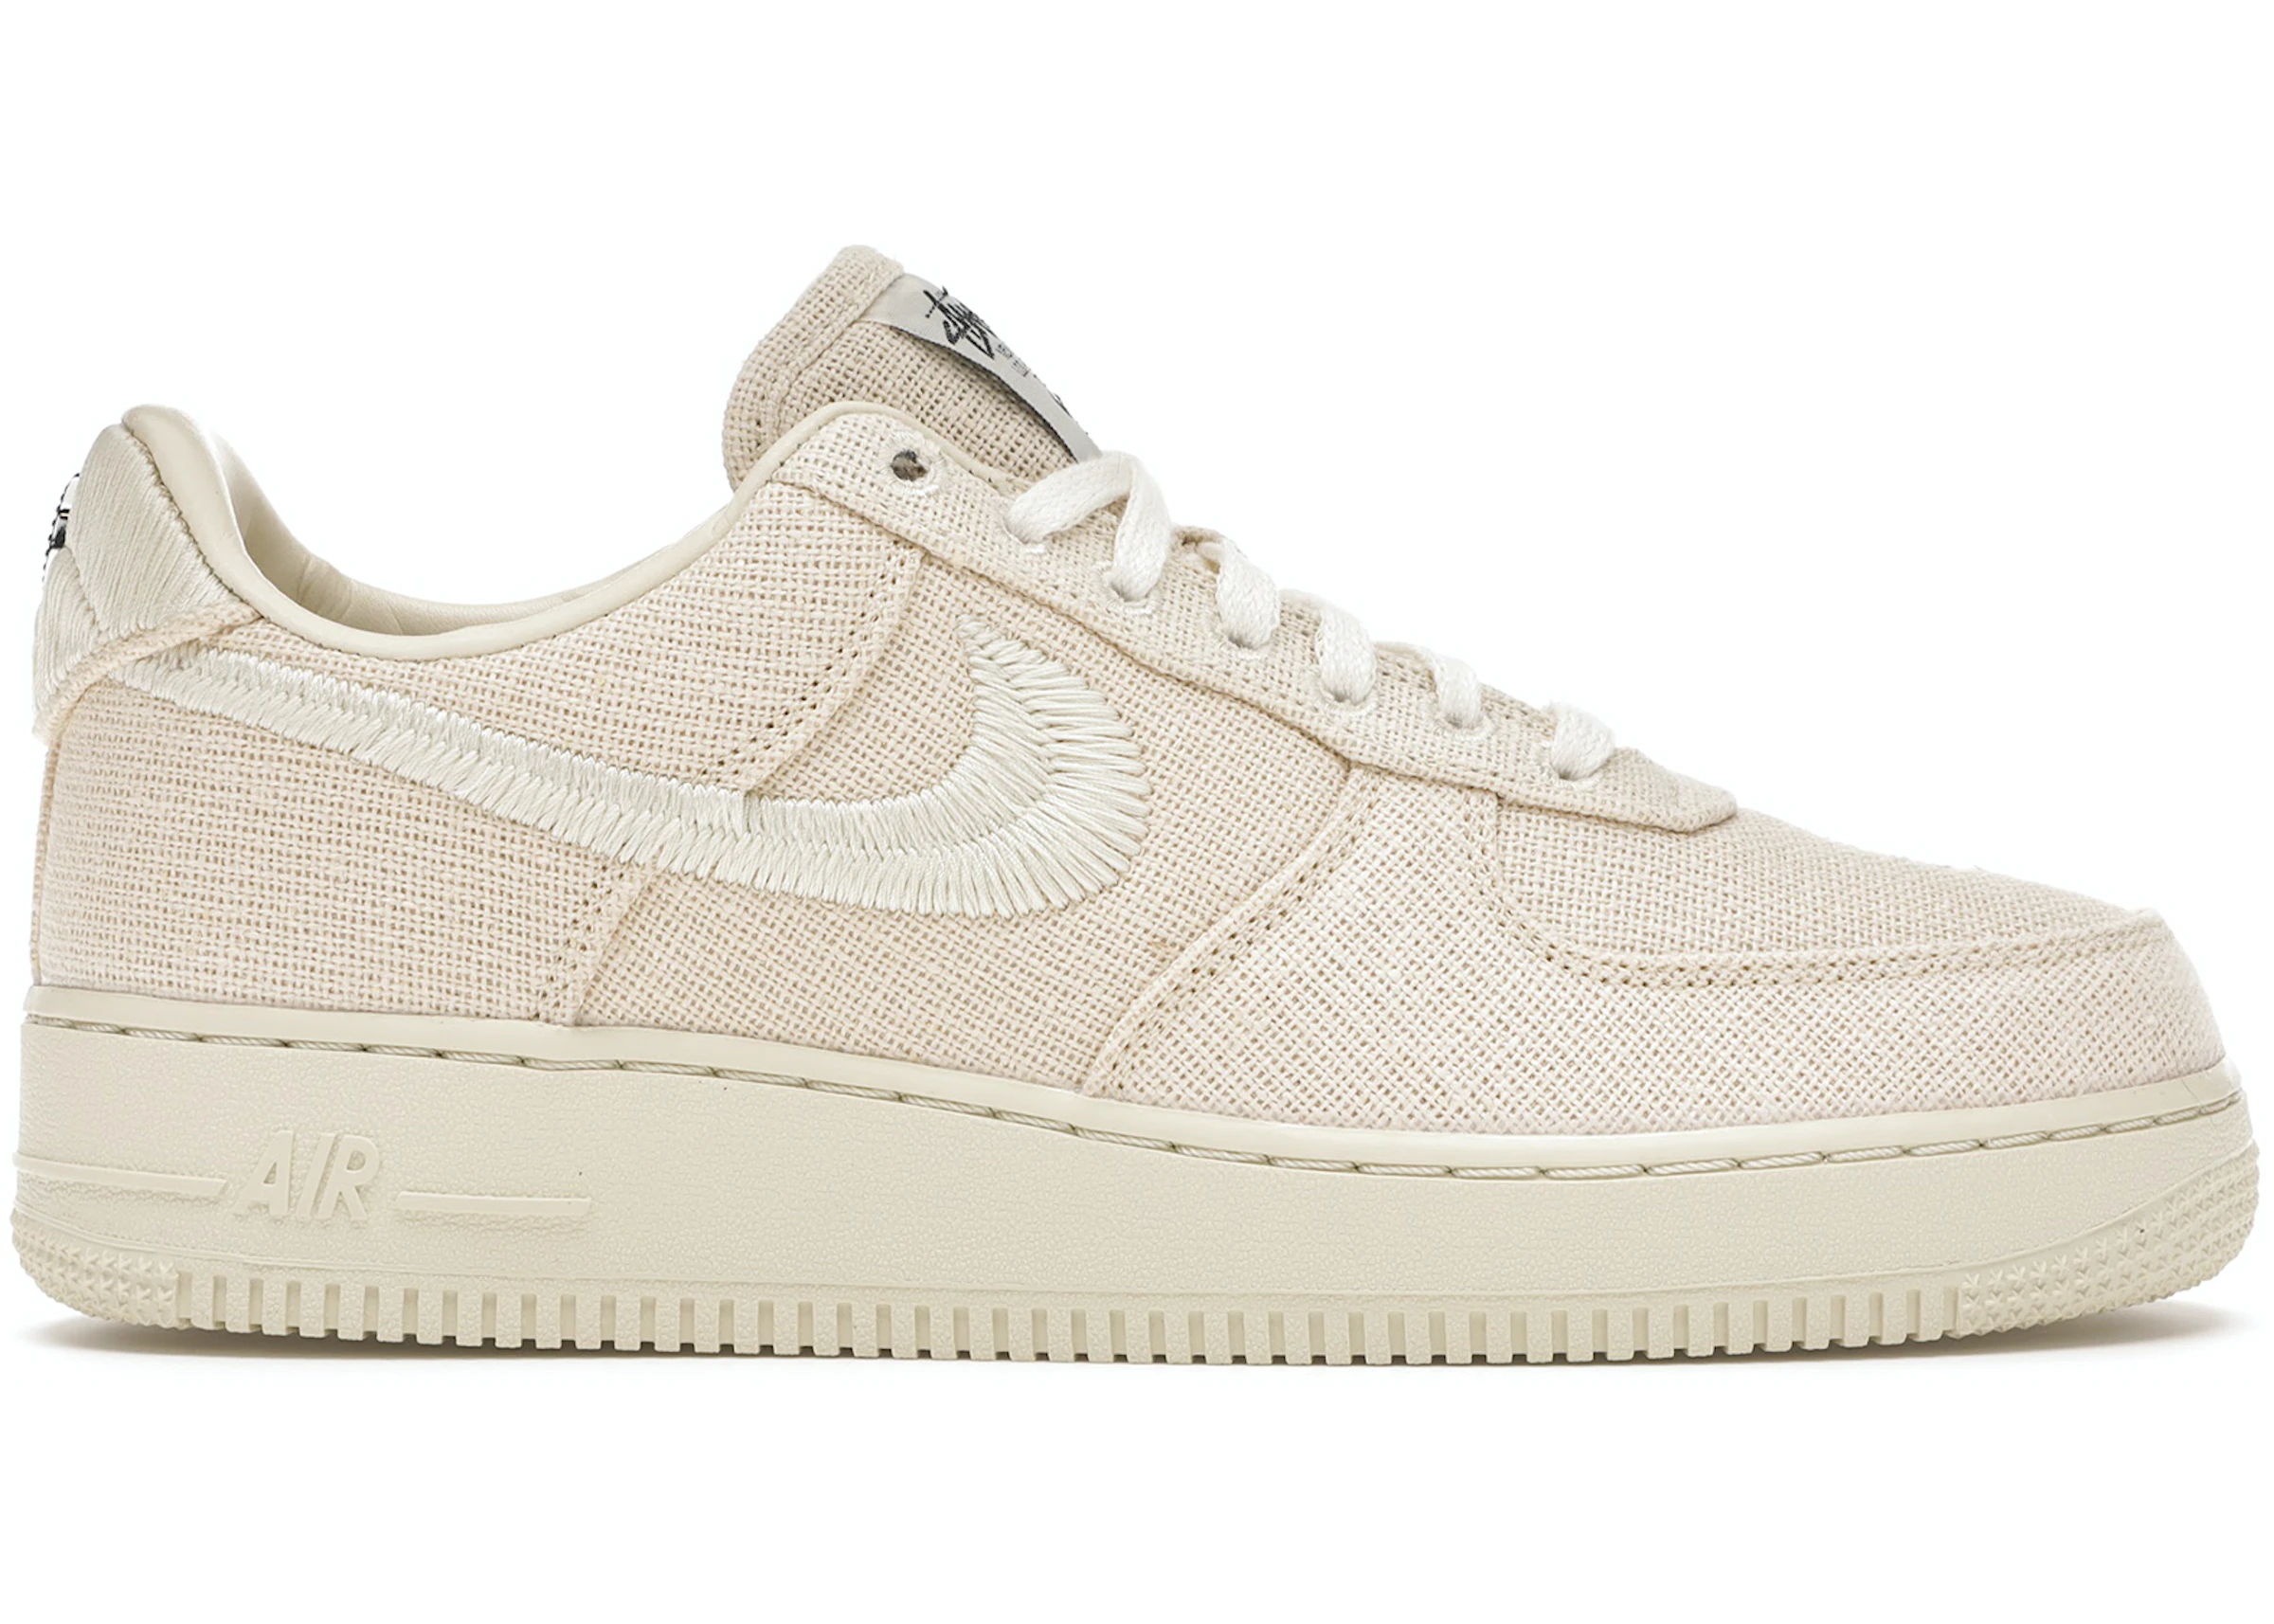 Buy Nike af1 travis scott sail Air Force Shoes & New Sneakers - StockX